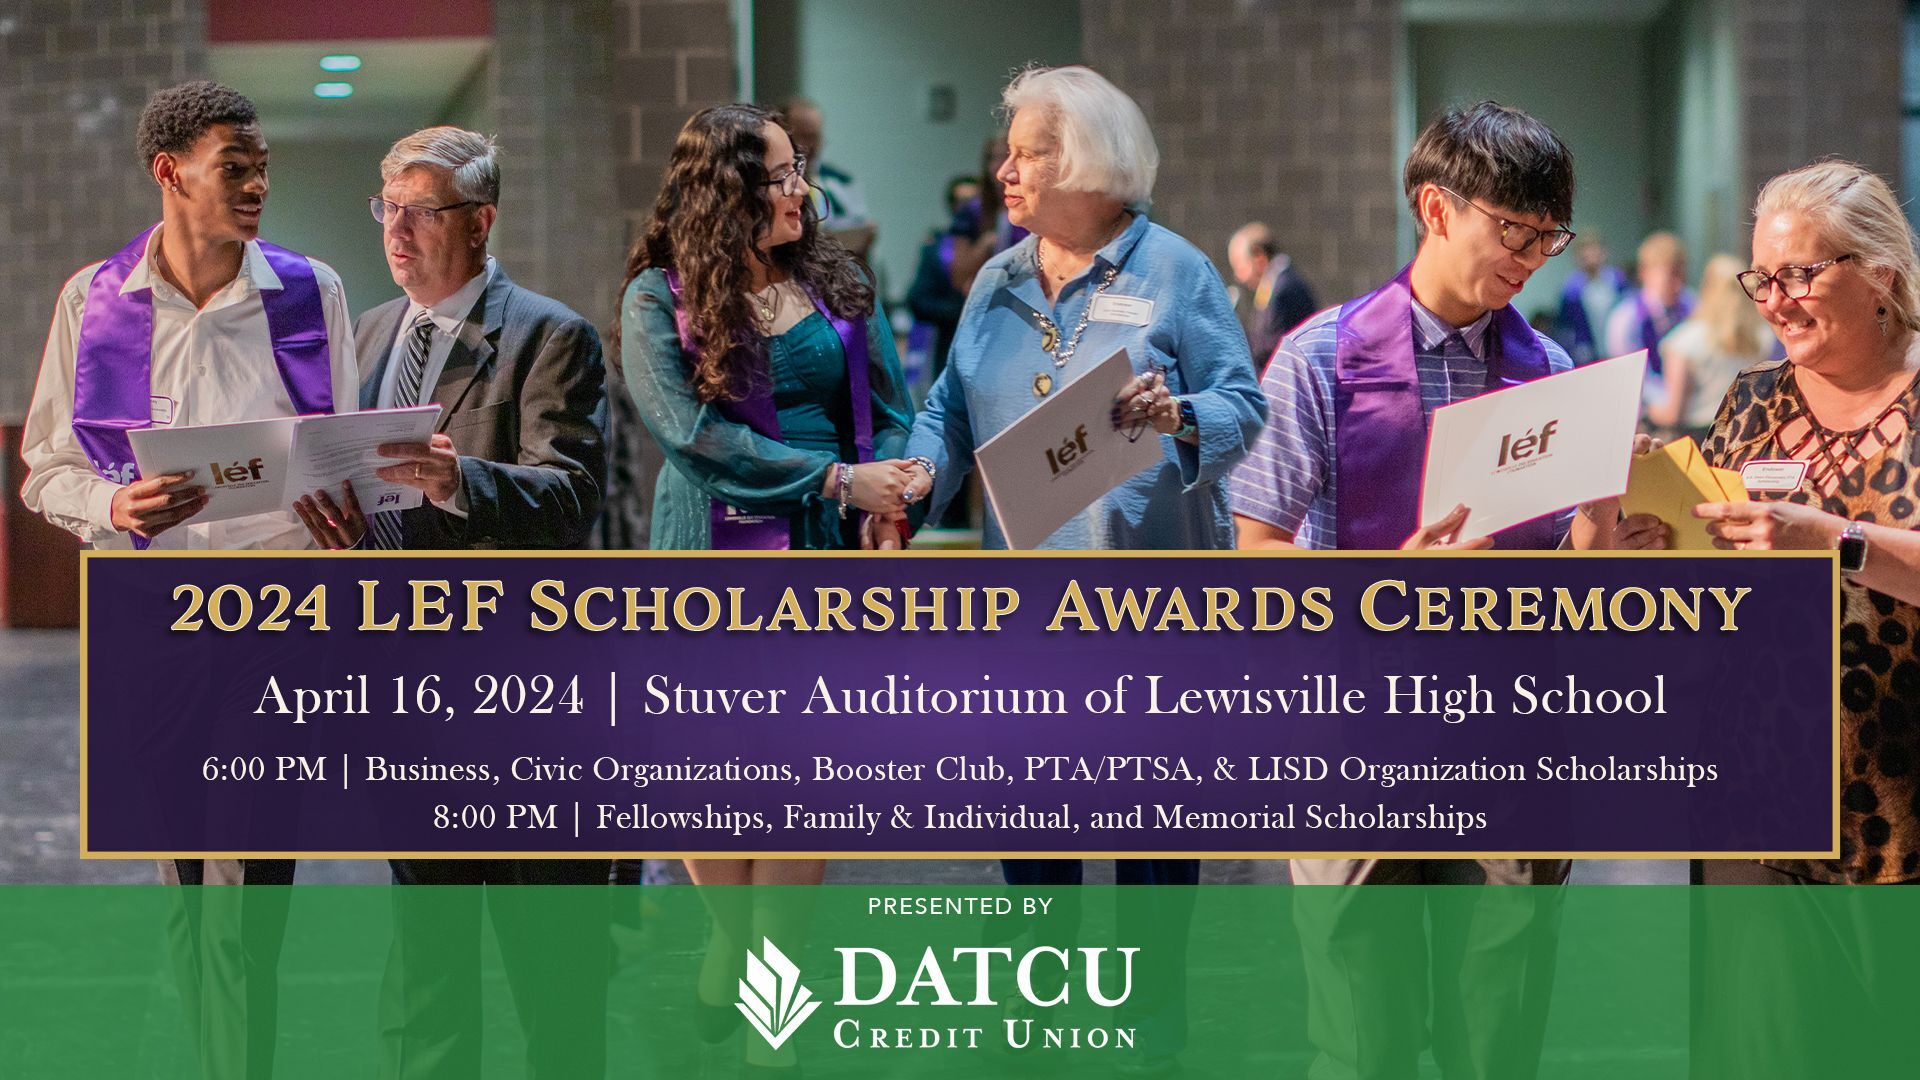 Save The Date for the 2024 Scholarship Awards Ceremony on April 16, 2024